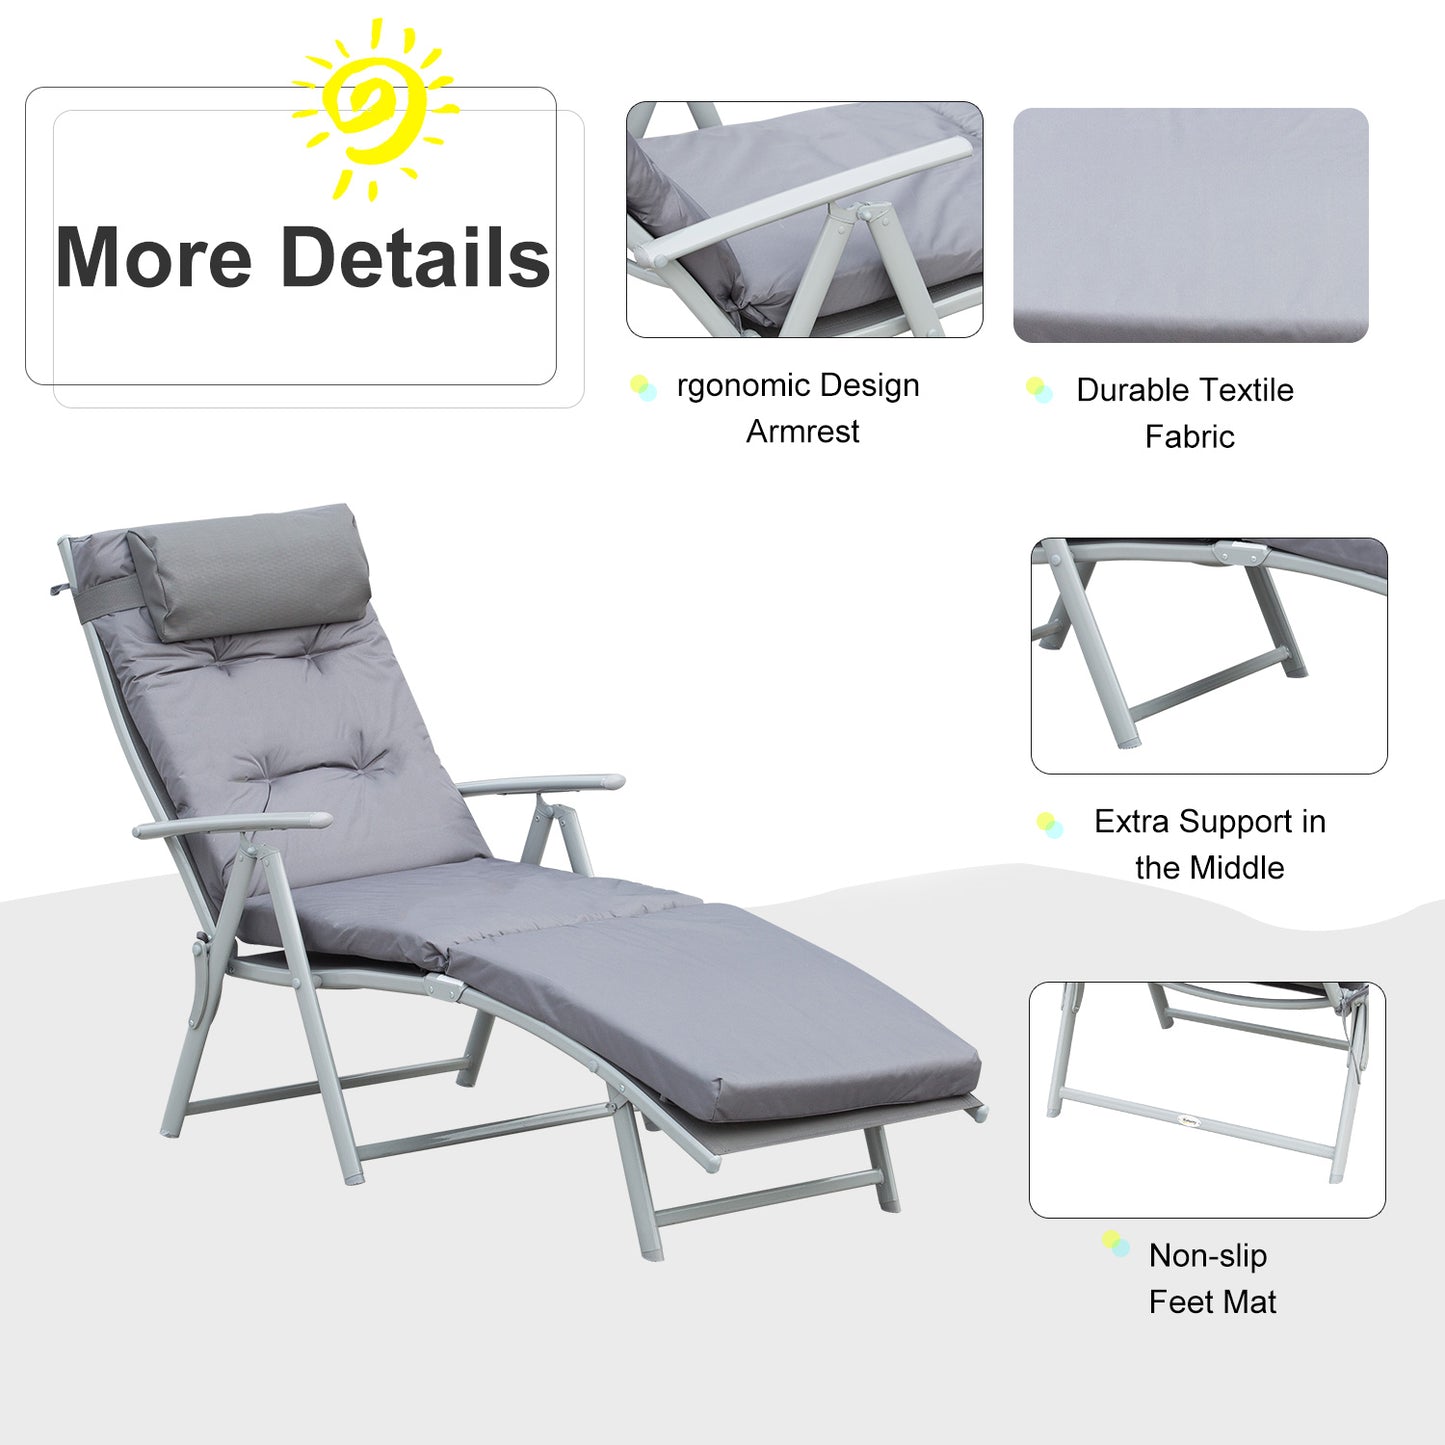 Outsunny Outdoor Patio Sun Lounger Garden Texteline Foldable Reclining Chair Pillow Adjustable Recliner with Cushion - Grey